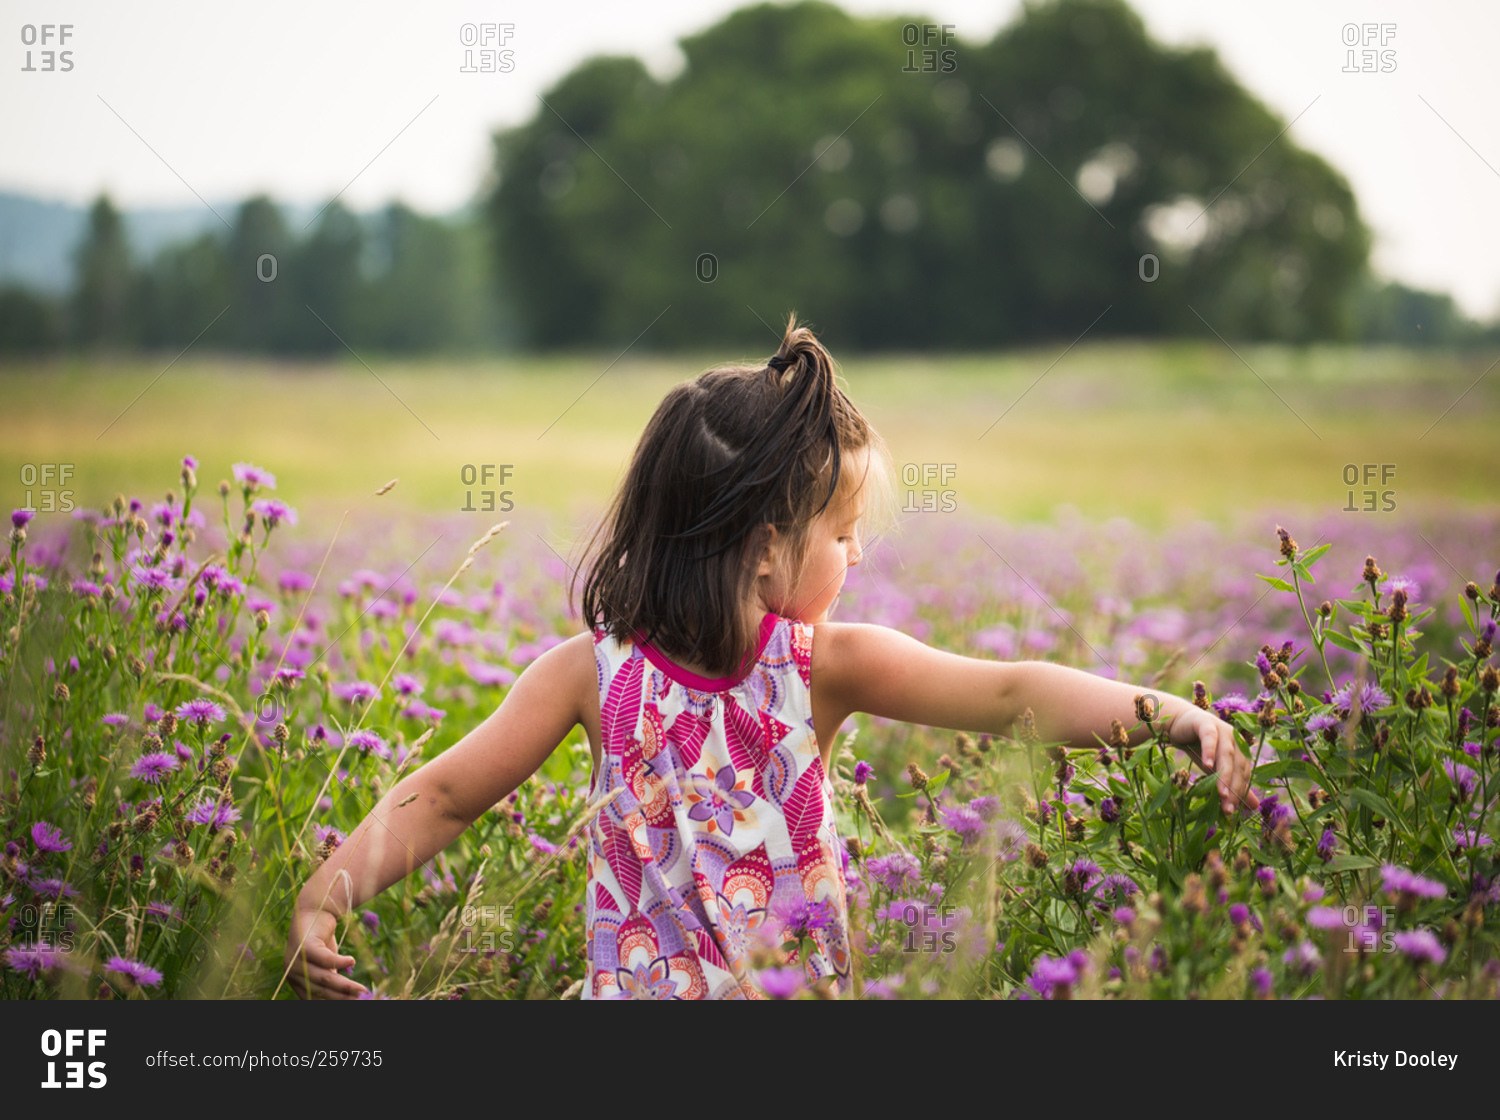 Young girl walking through field of purple flowers